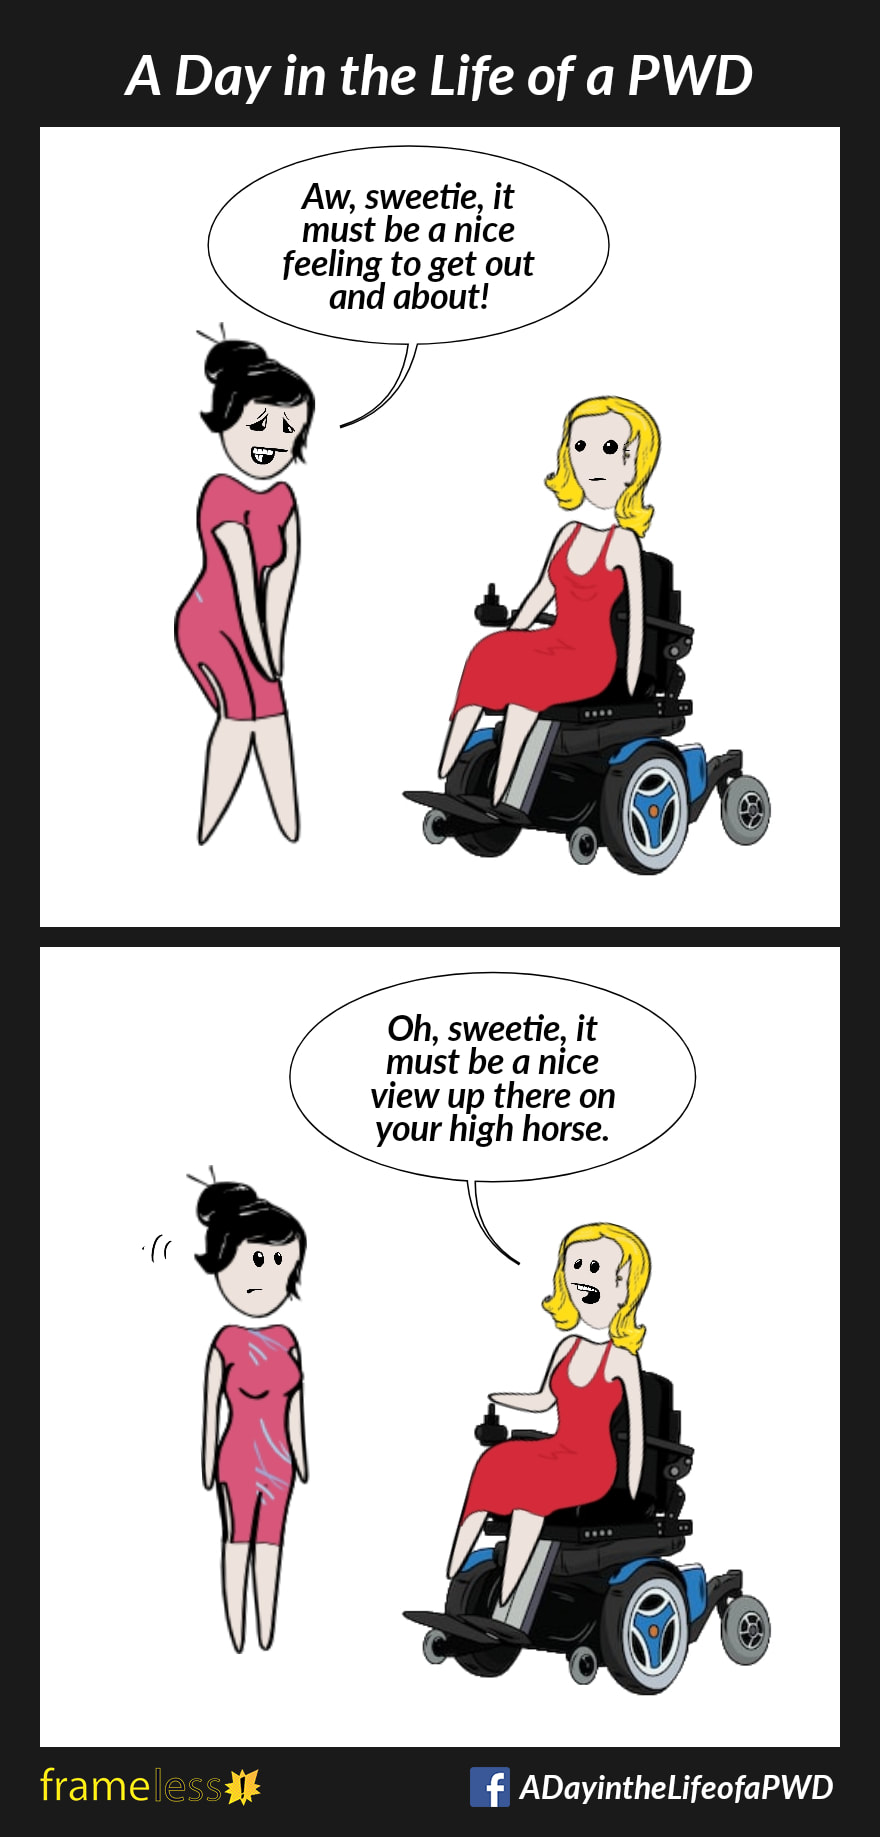 COMIC STRIP 
A Day in the Life of a PWD (Person With a Disability) 

Frame 1:
A woman in a power wheelchair is approached by a stranger.
STRANGER: Aw, sweetie, it must be a nice feeling to get out and qbout!

Frame 2:
WOMAN: Oh, sweetie, it must be a nice view up there on your high horse.